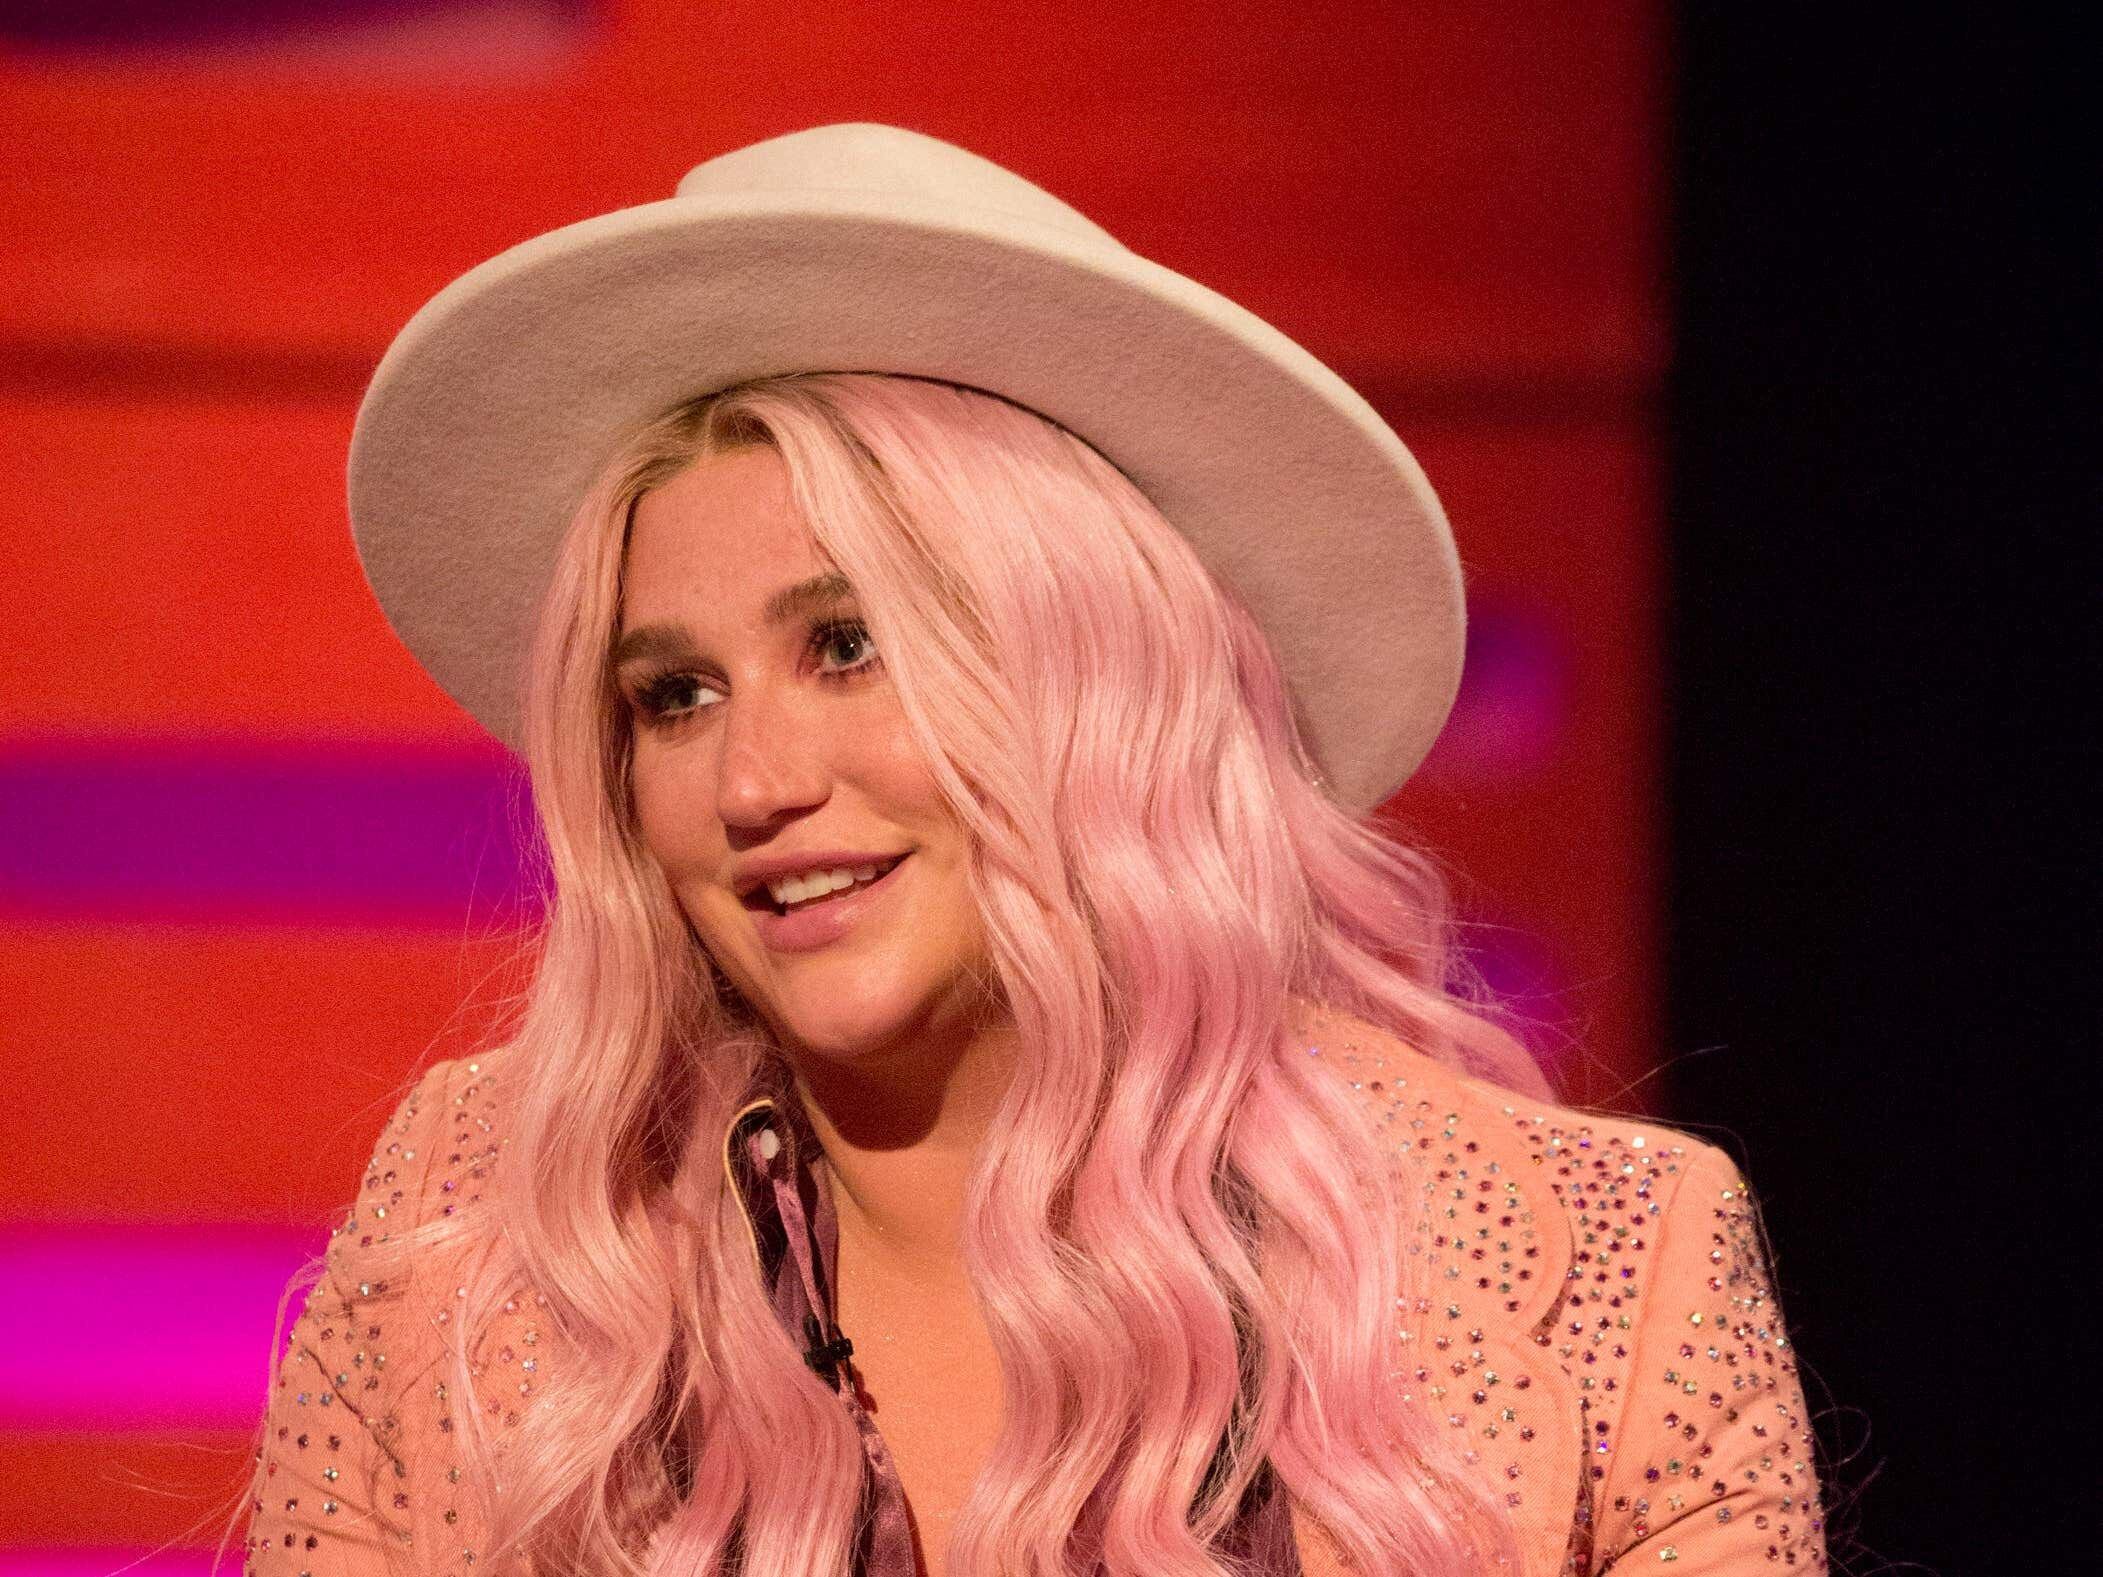 Kesha and producer Dr Luke announce resolution in their US lawsuit